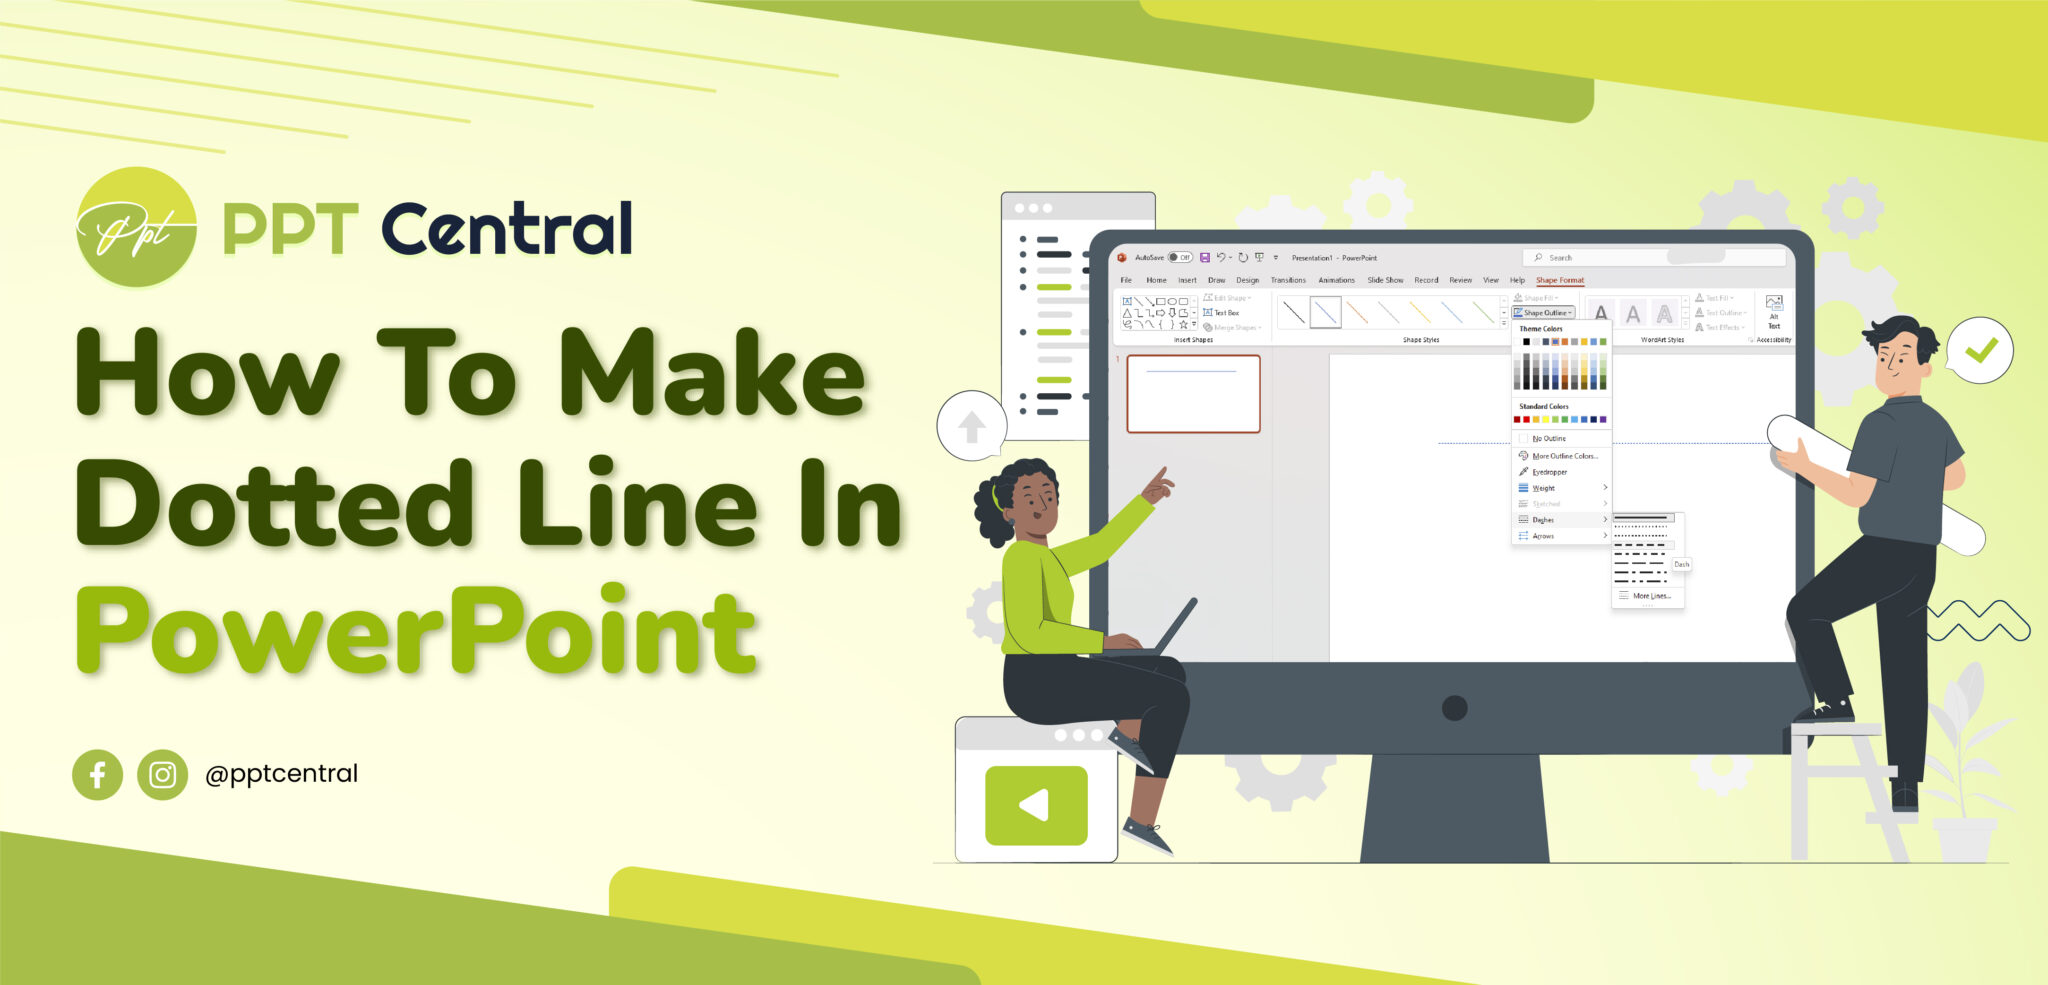 How To Make A Dotted Line In PowerPoint (StepByStep) PPT Central